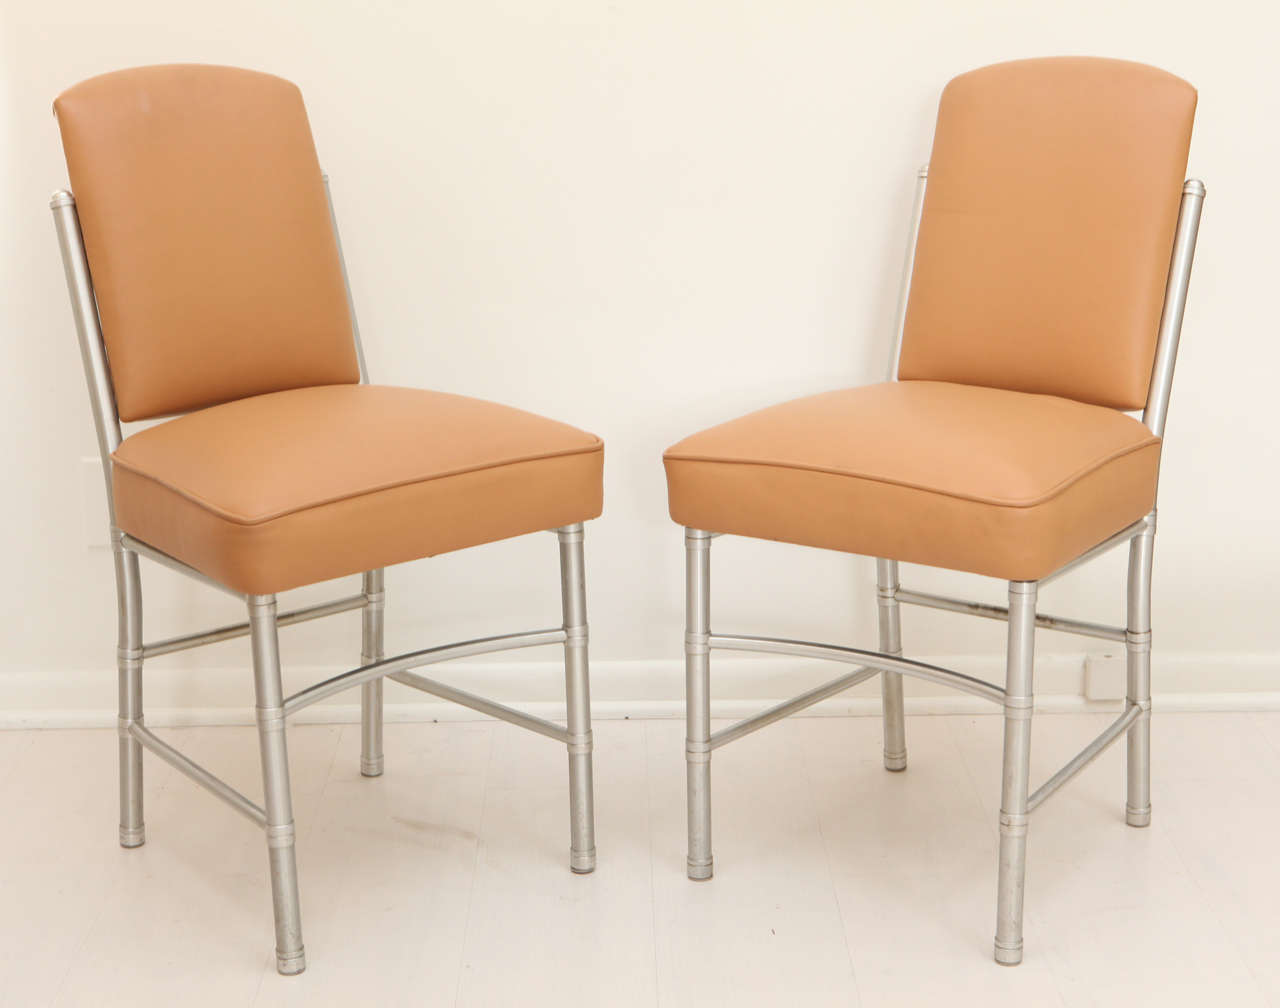 Four WM carmel colored leather dining chairs with chrome legs